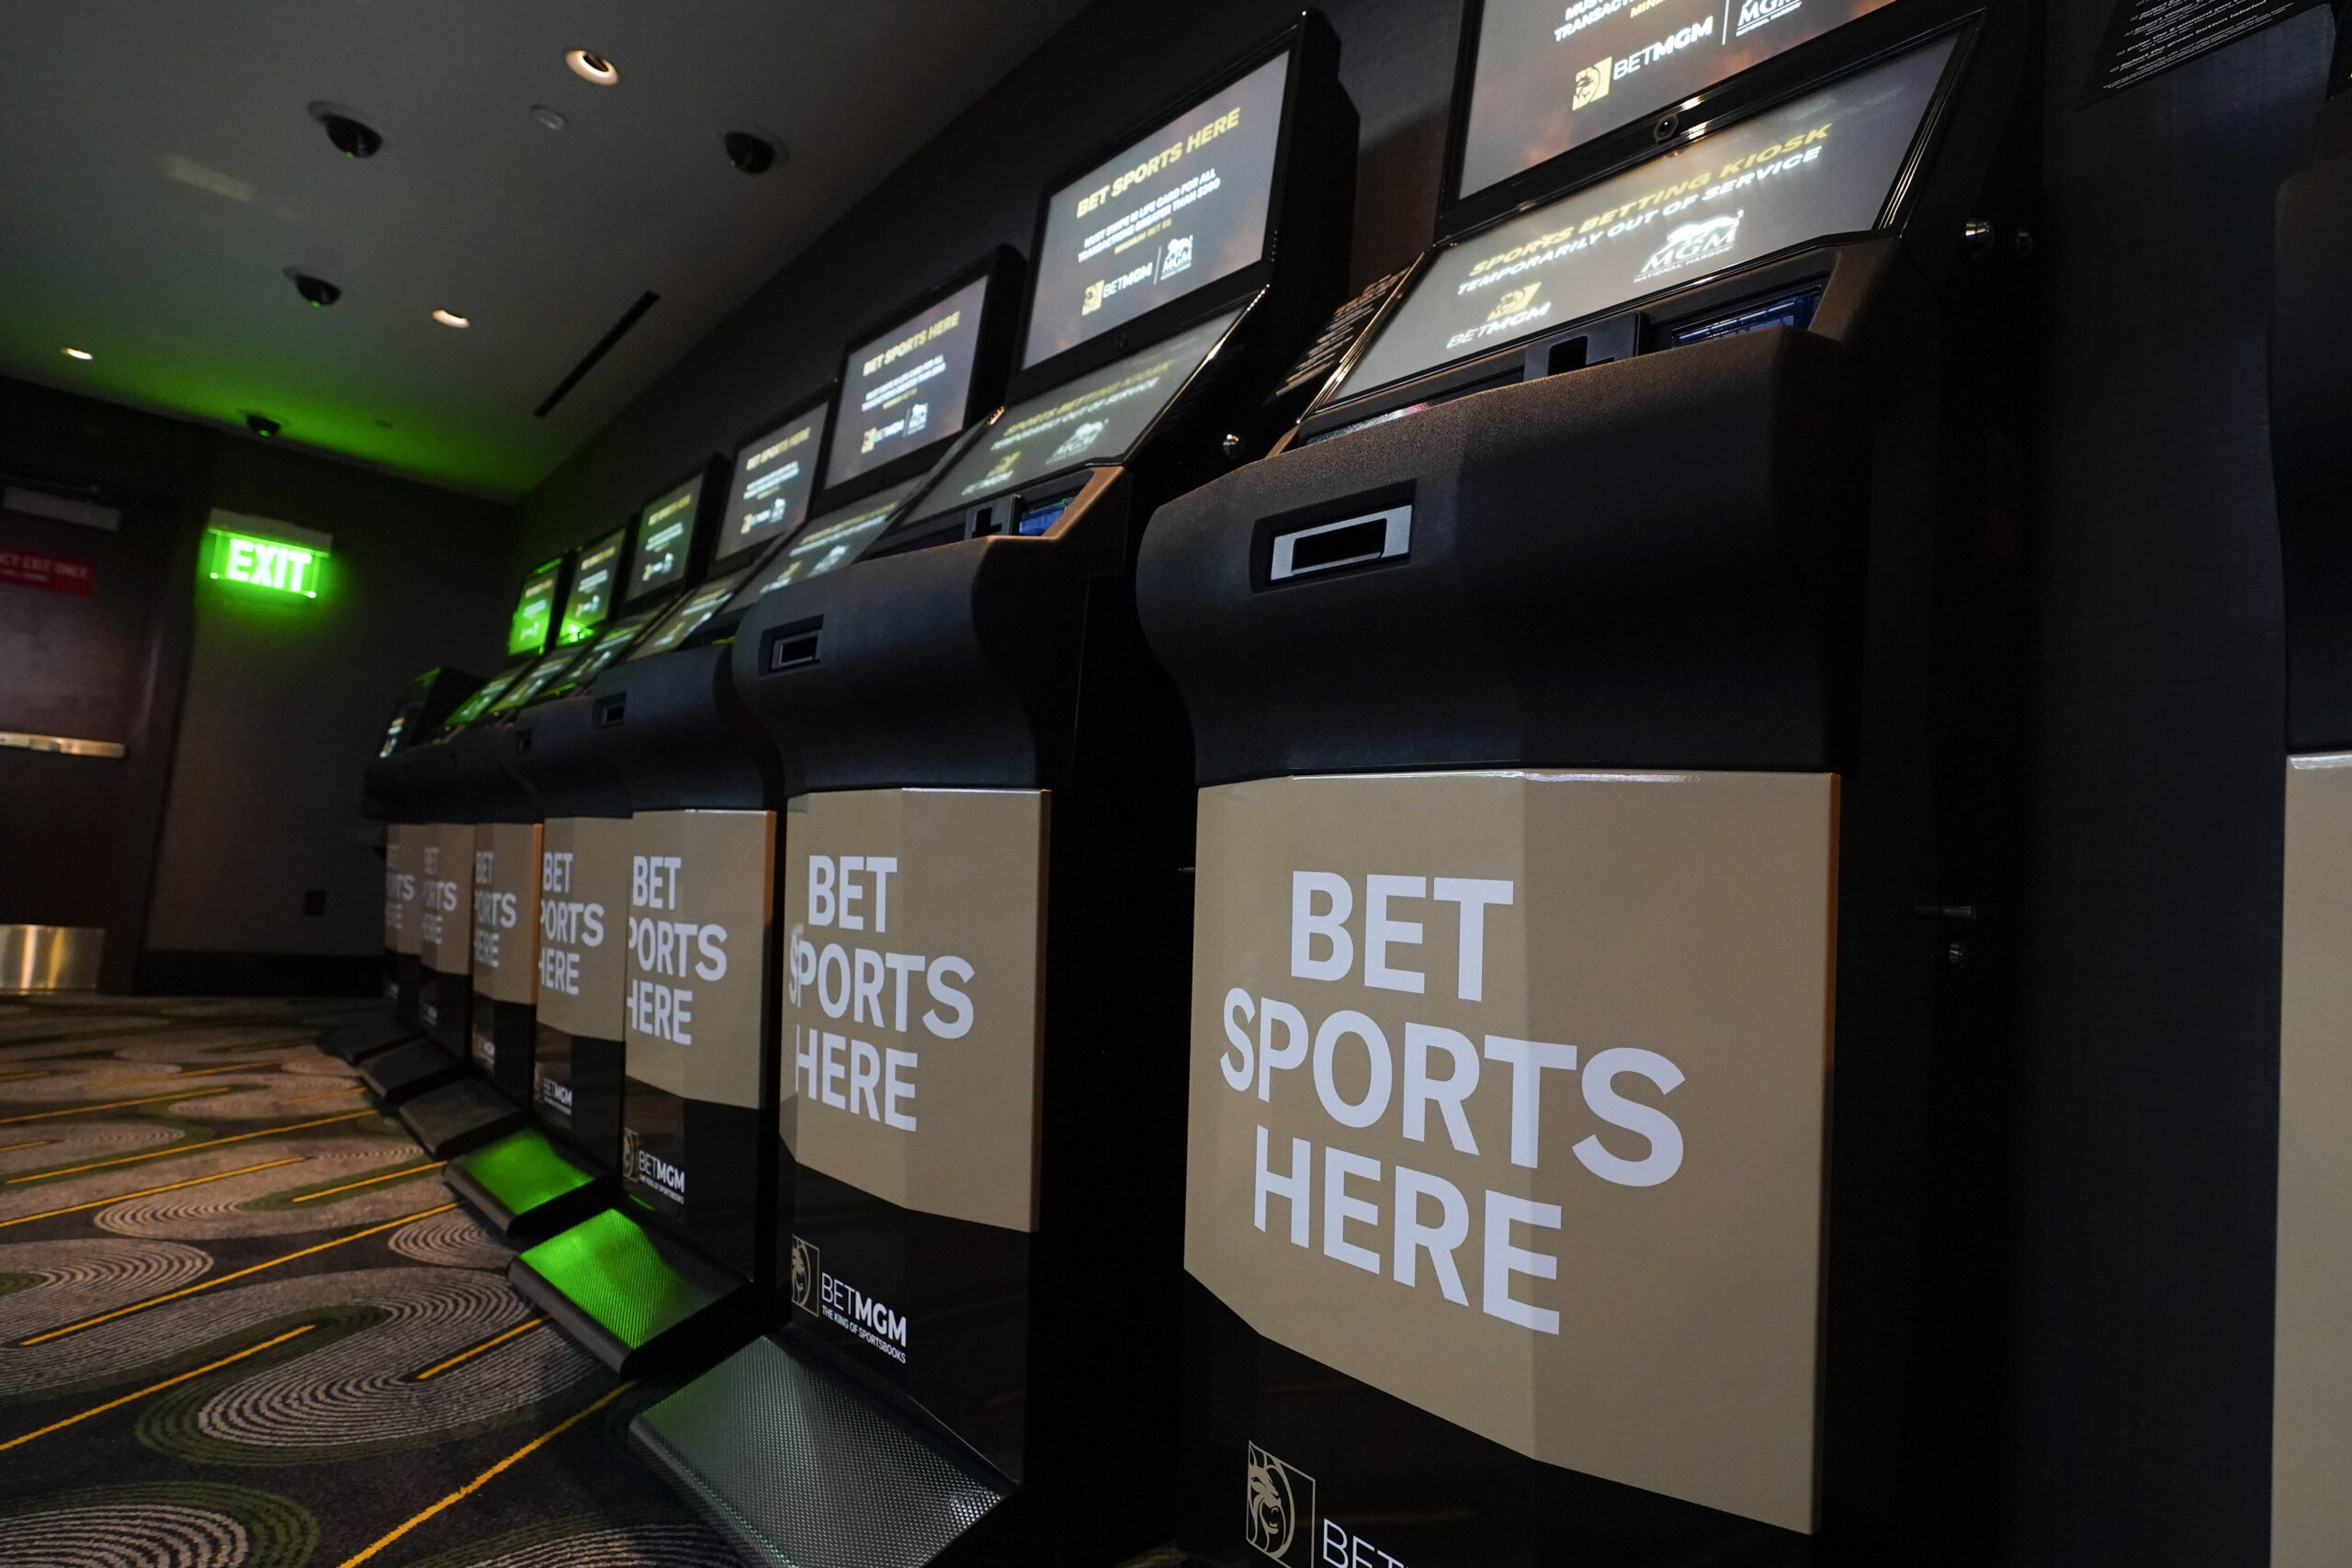 Online sports betting in Md. to begin Wednesday - WTOP News